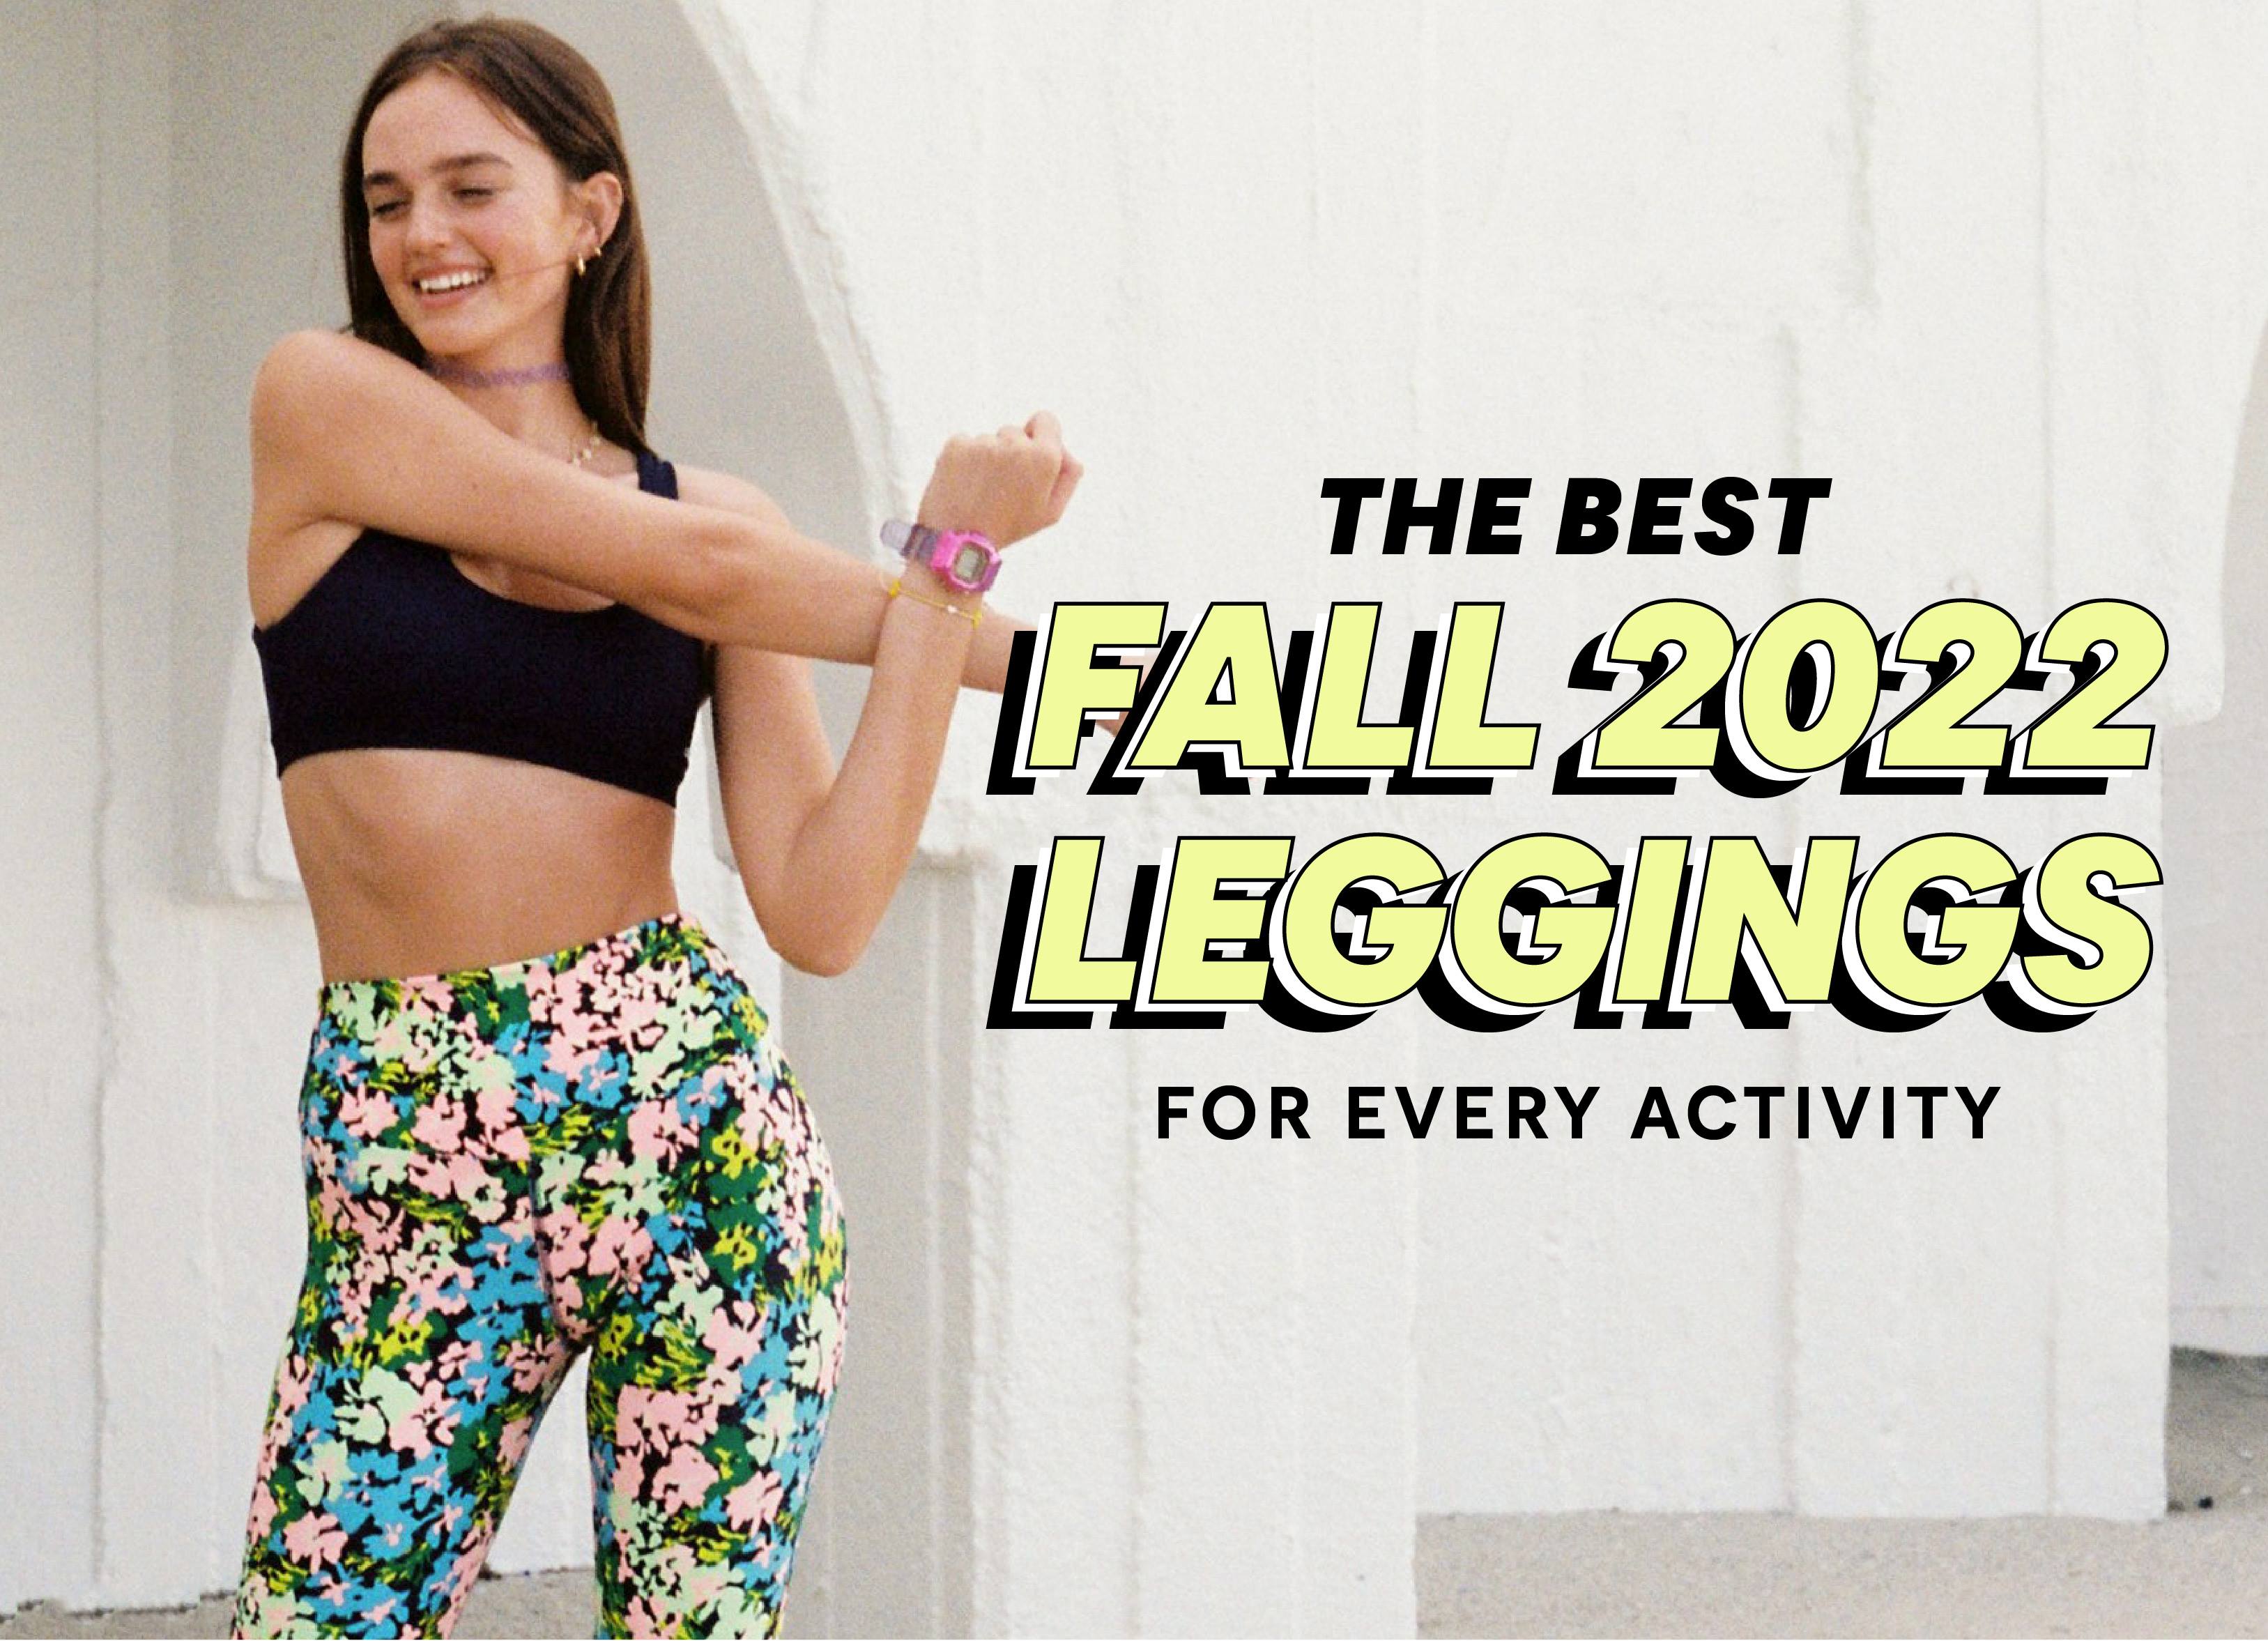 THE BEST FALL 2022 LEGGINGS FOR EVERY ACTIVITY!